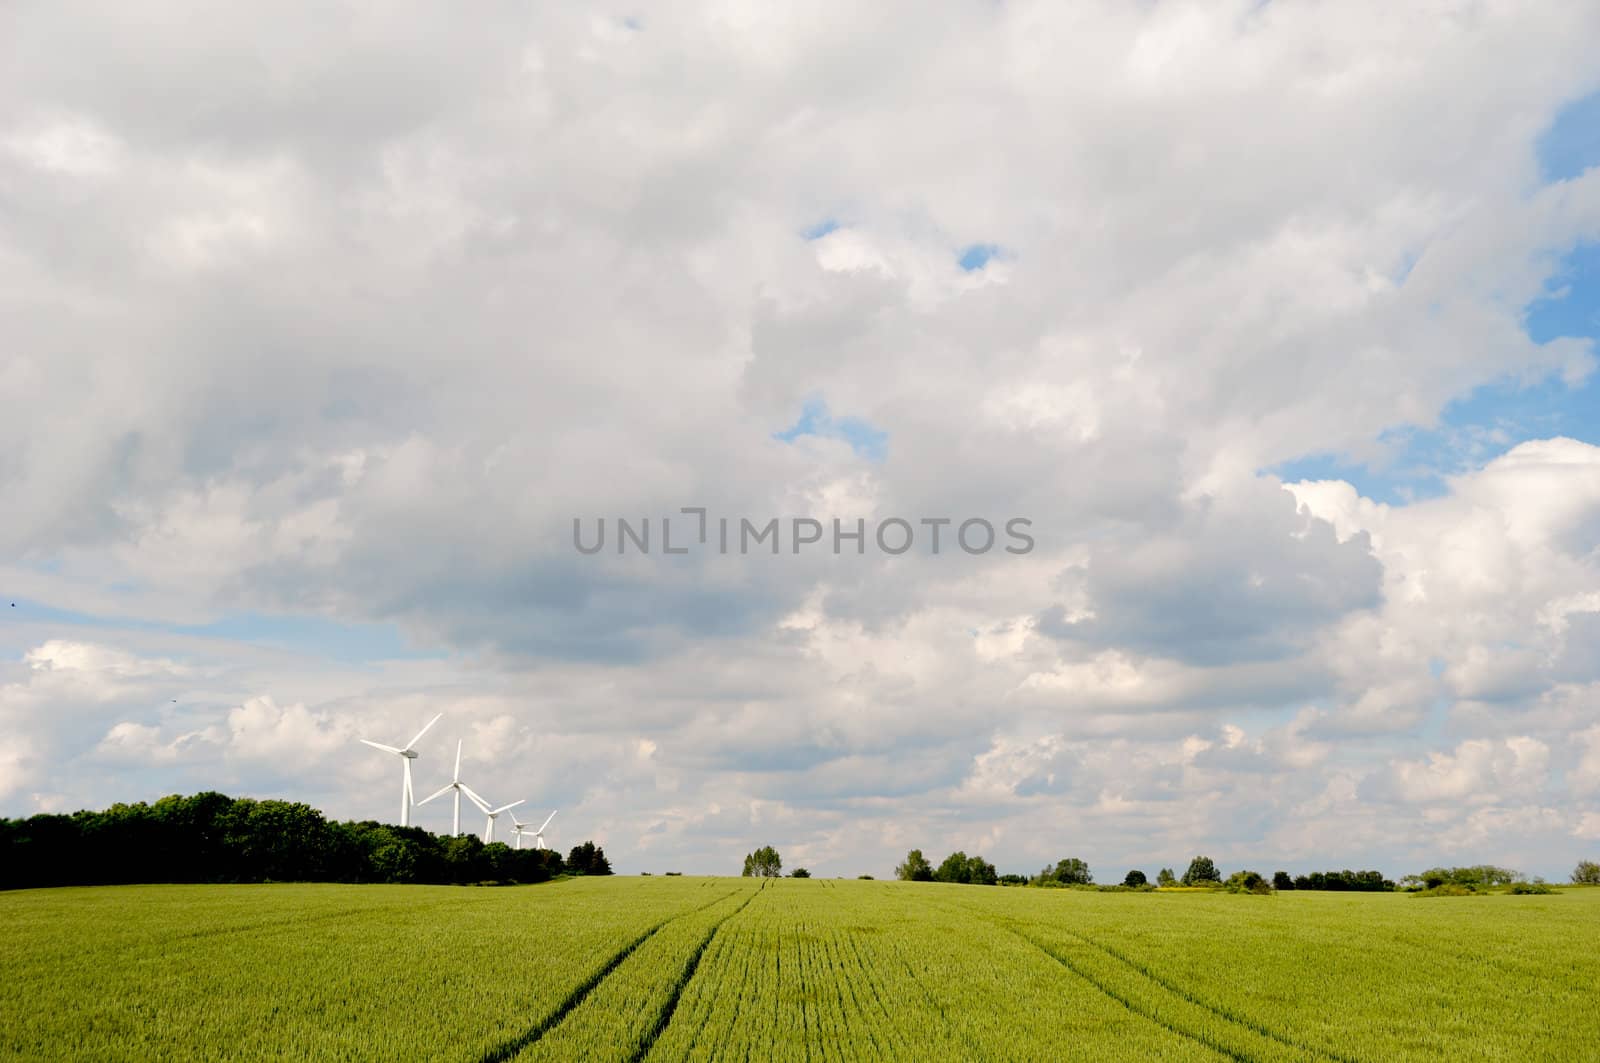 Landscape with green field and cloudscape. In the background you can see five wind turbines.